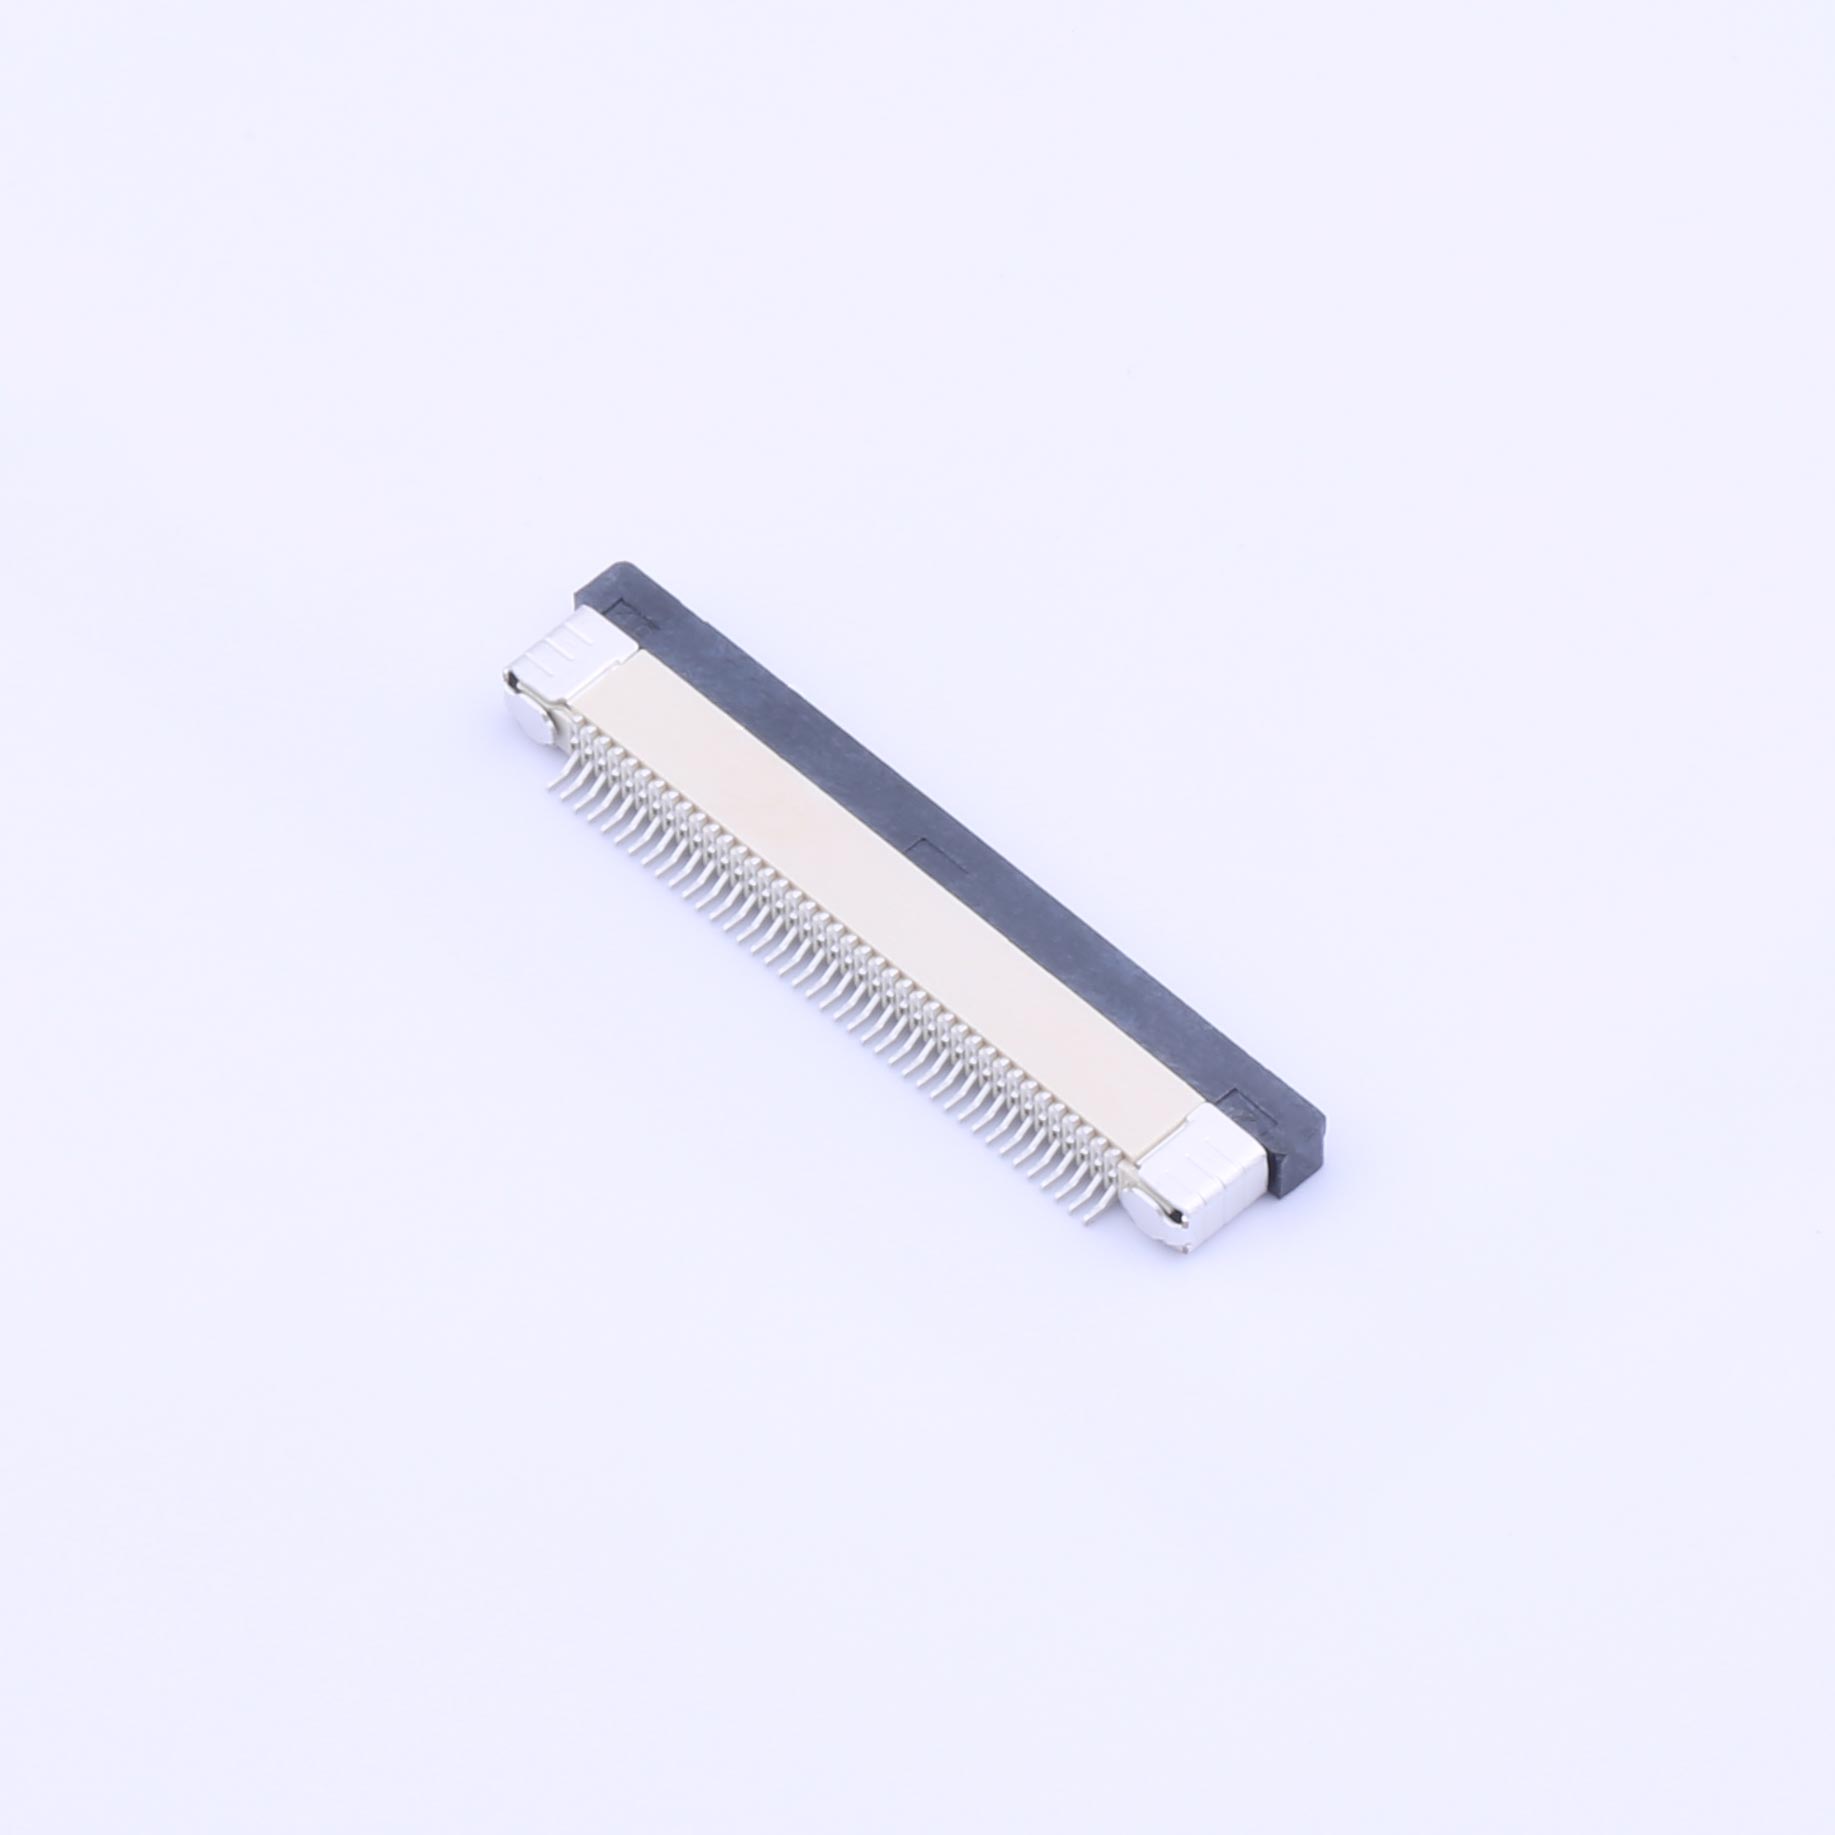 Kinghelm 0.5mm Pitch FPC FFC Connector 40P Height - KH-CL0.5-H2.0-40PIN